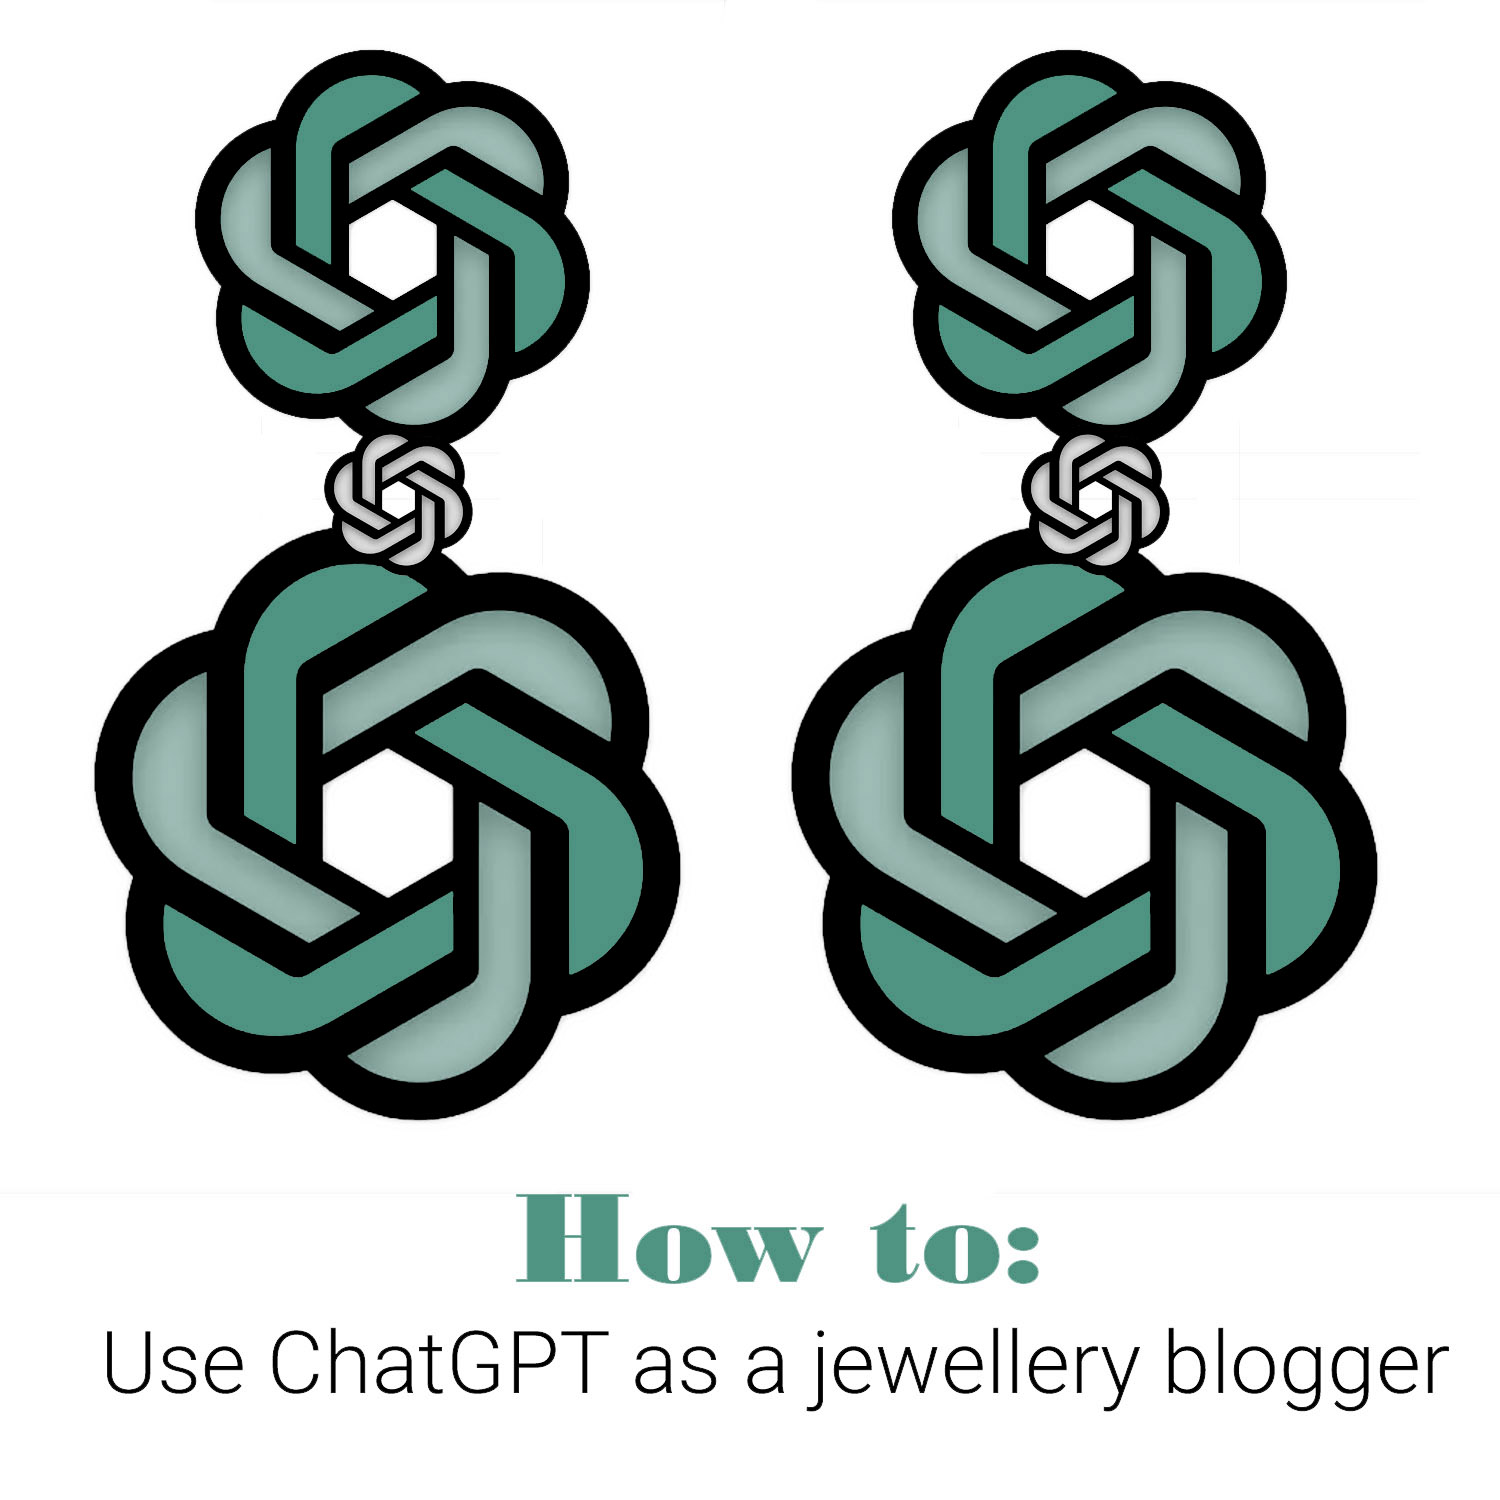 How to use ChatGPT for jewellery blogging